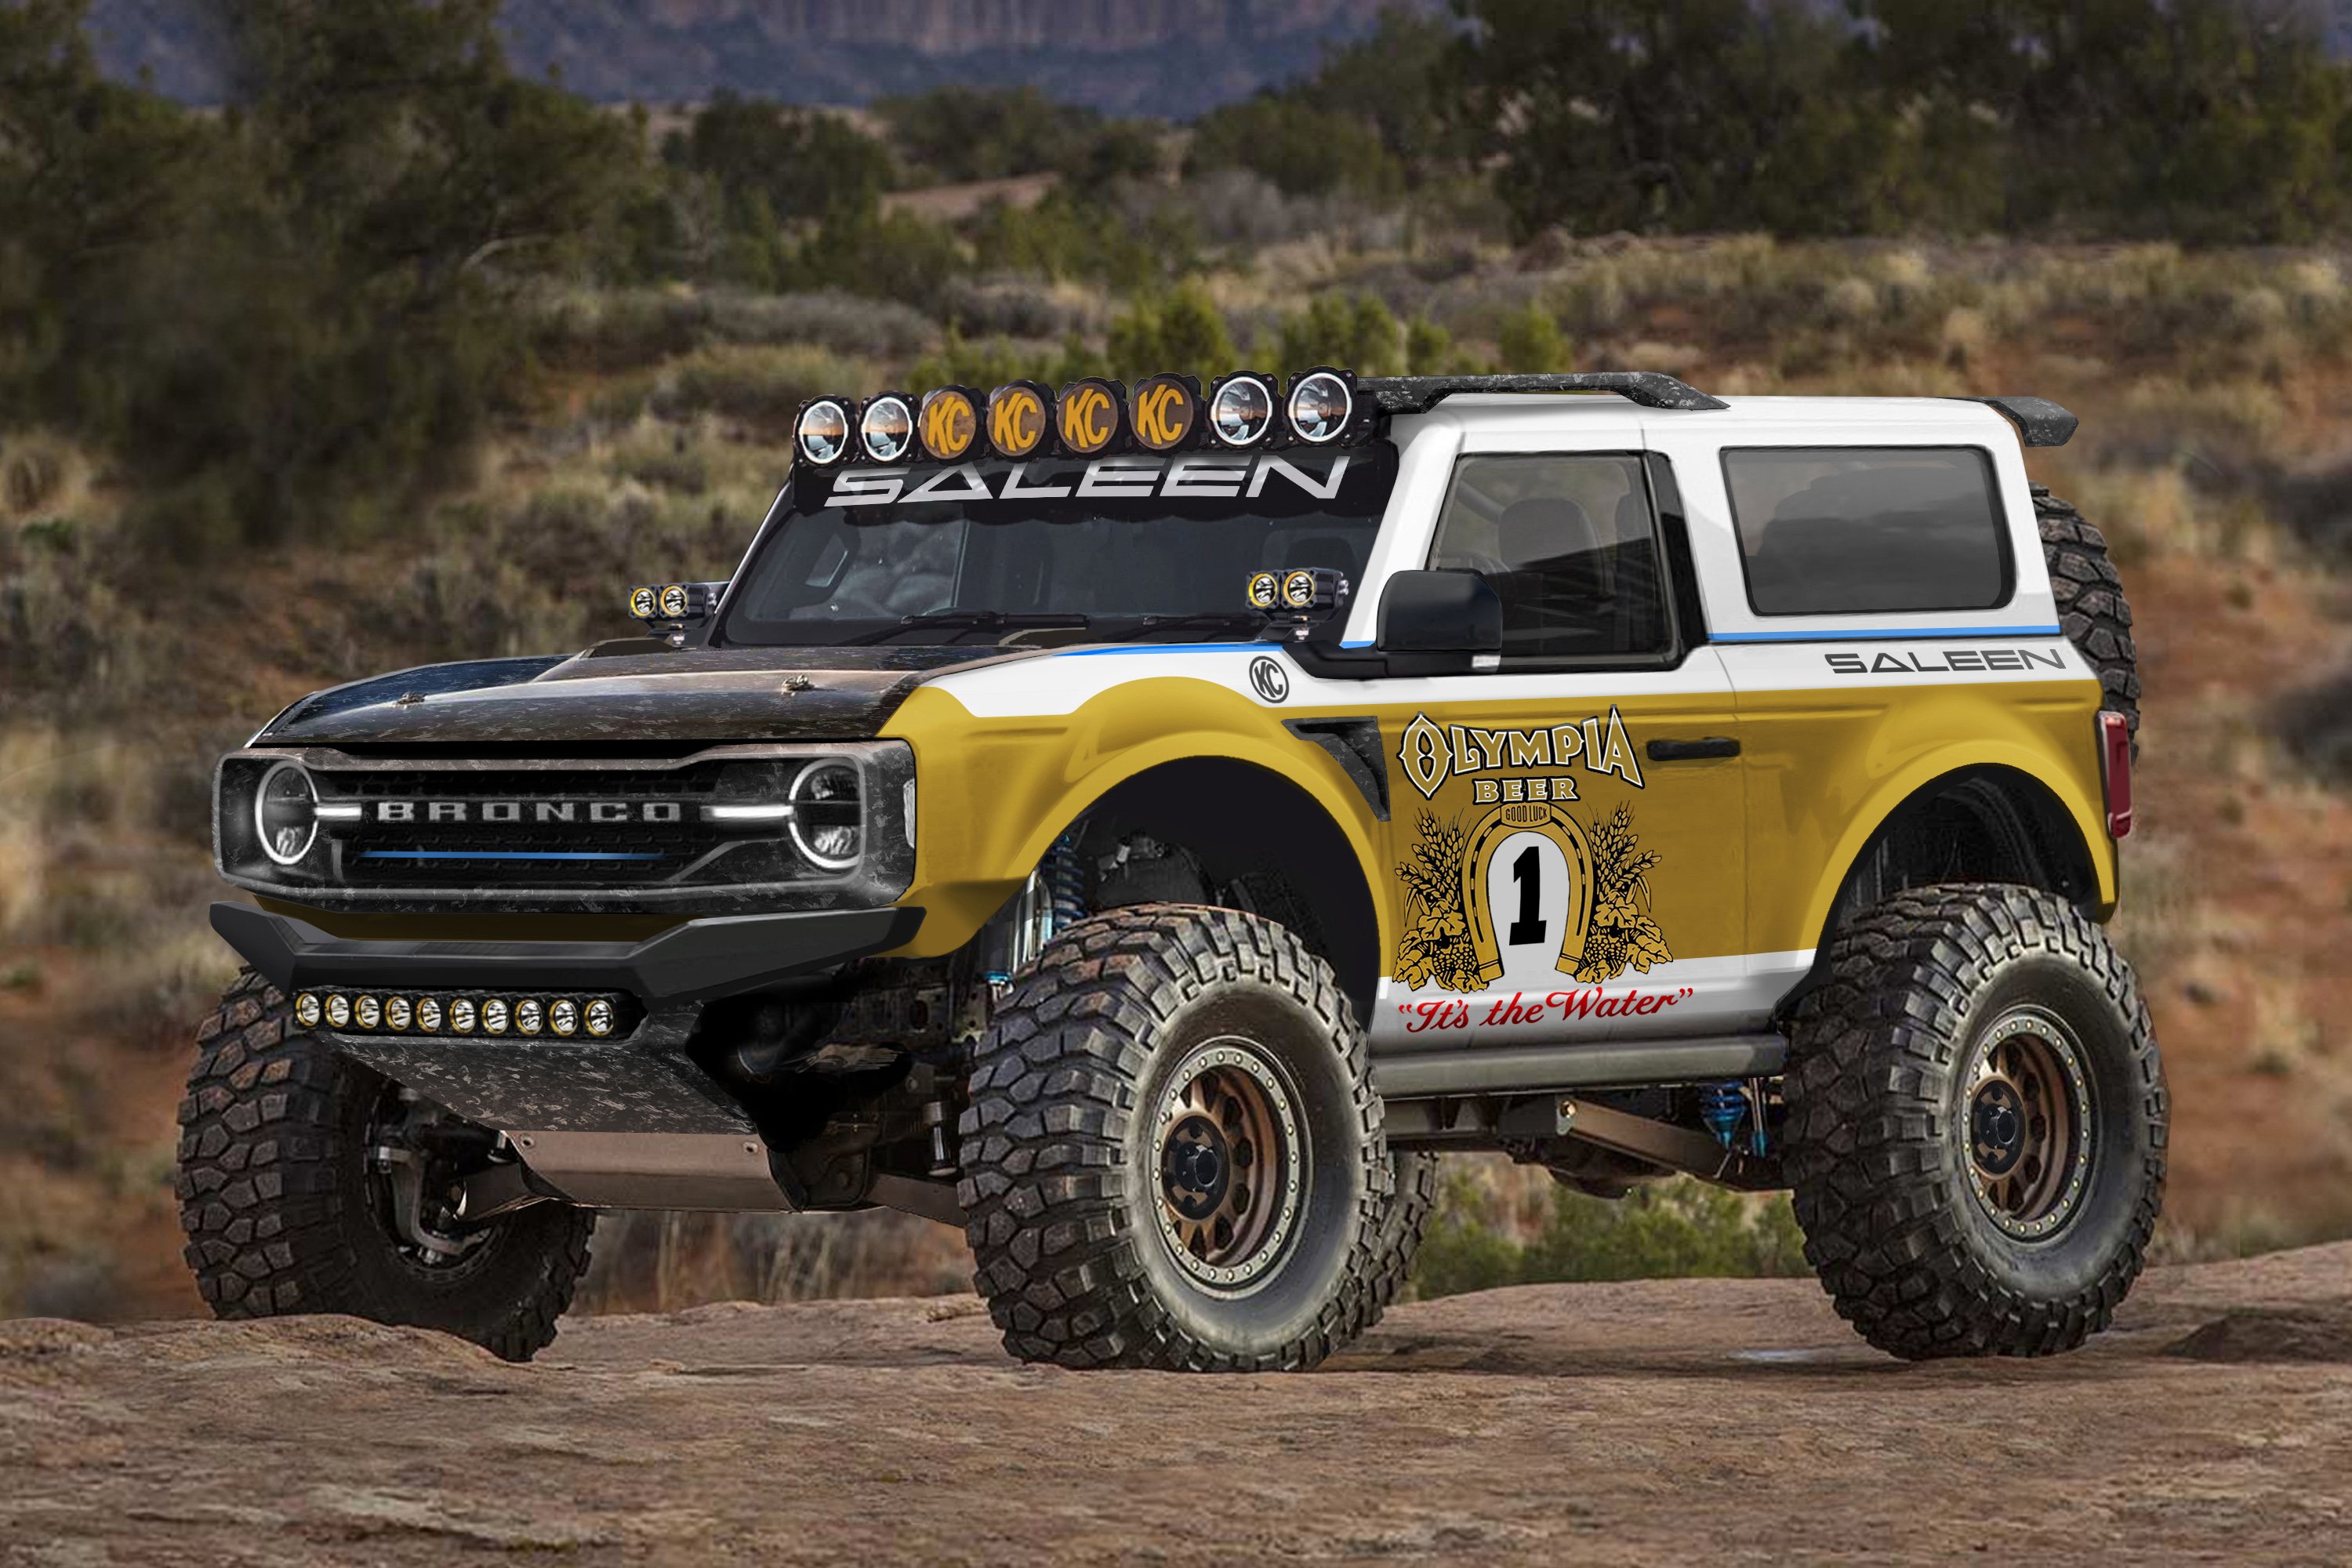 Video: Ford Raptor In Ford Bronco Clothing - Off Road Xtreme